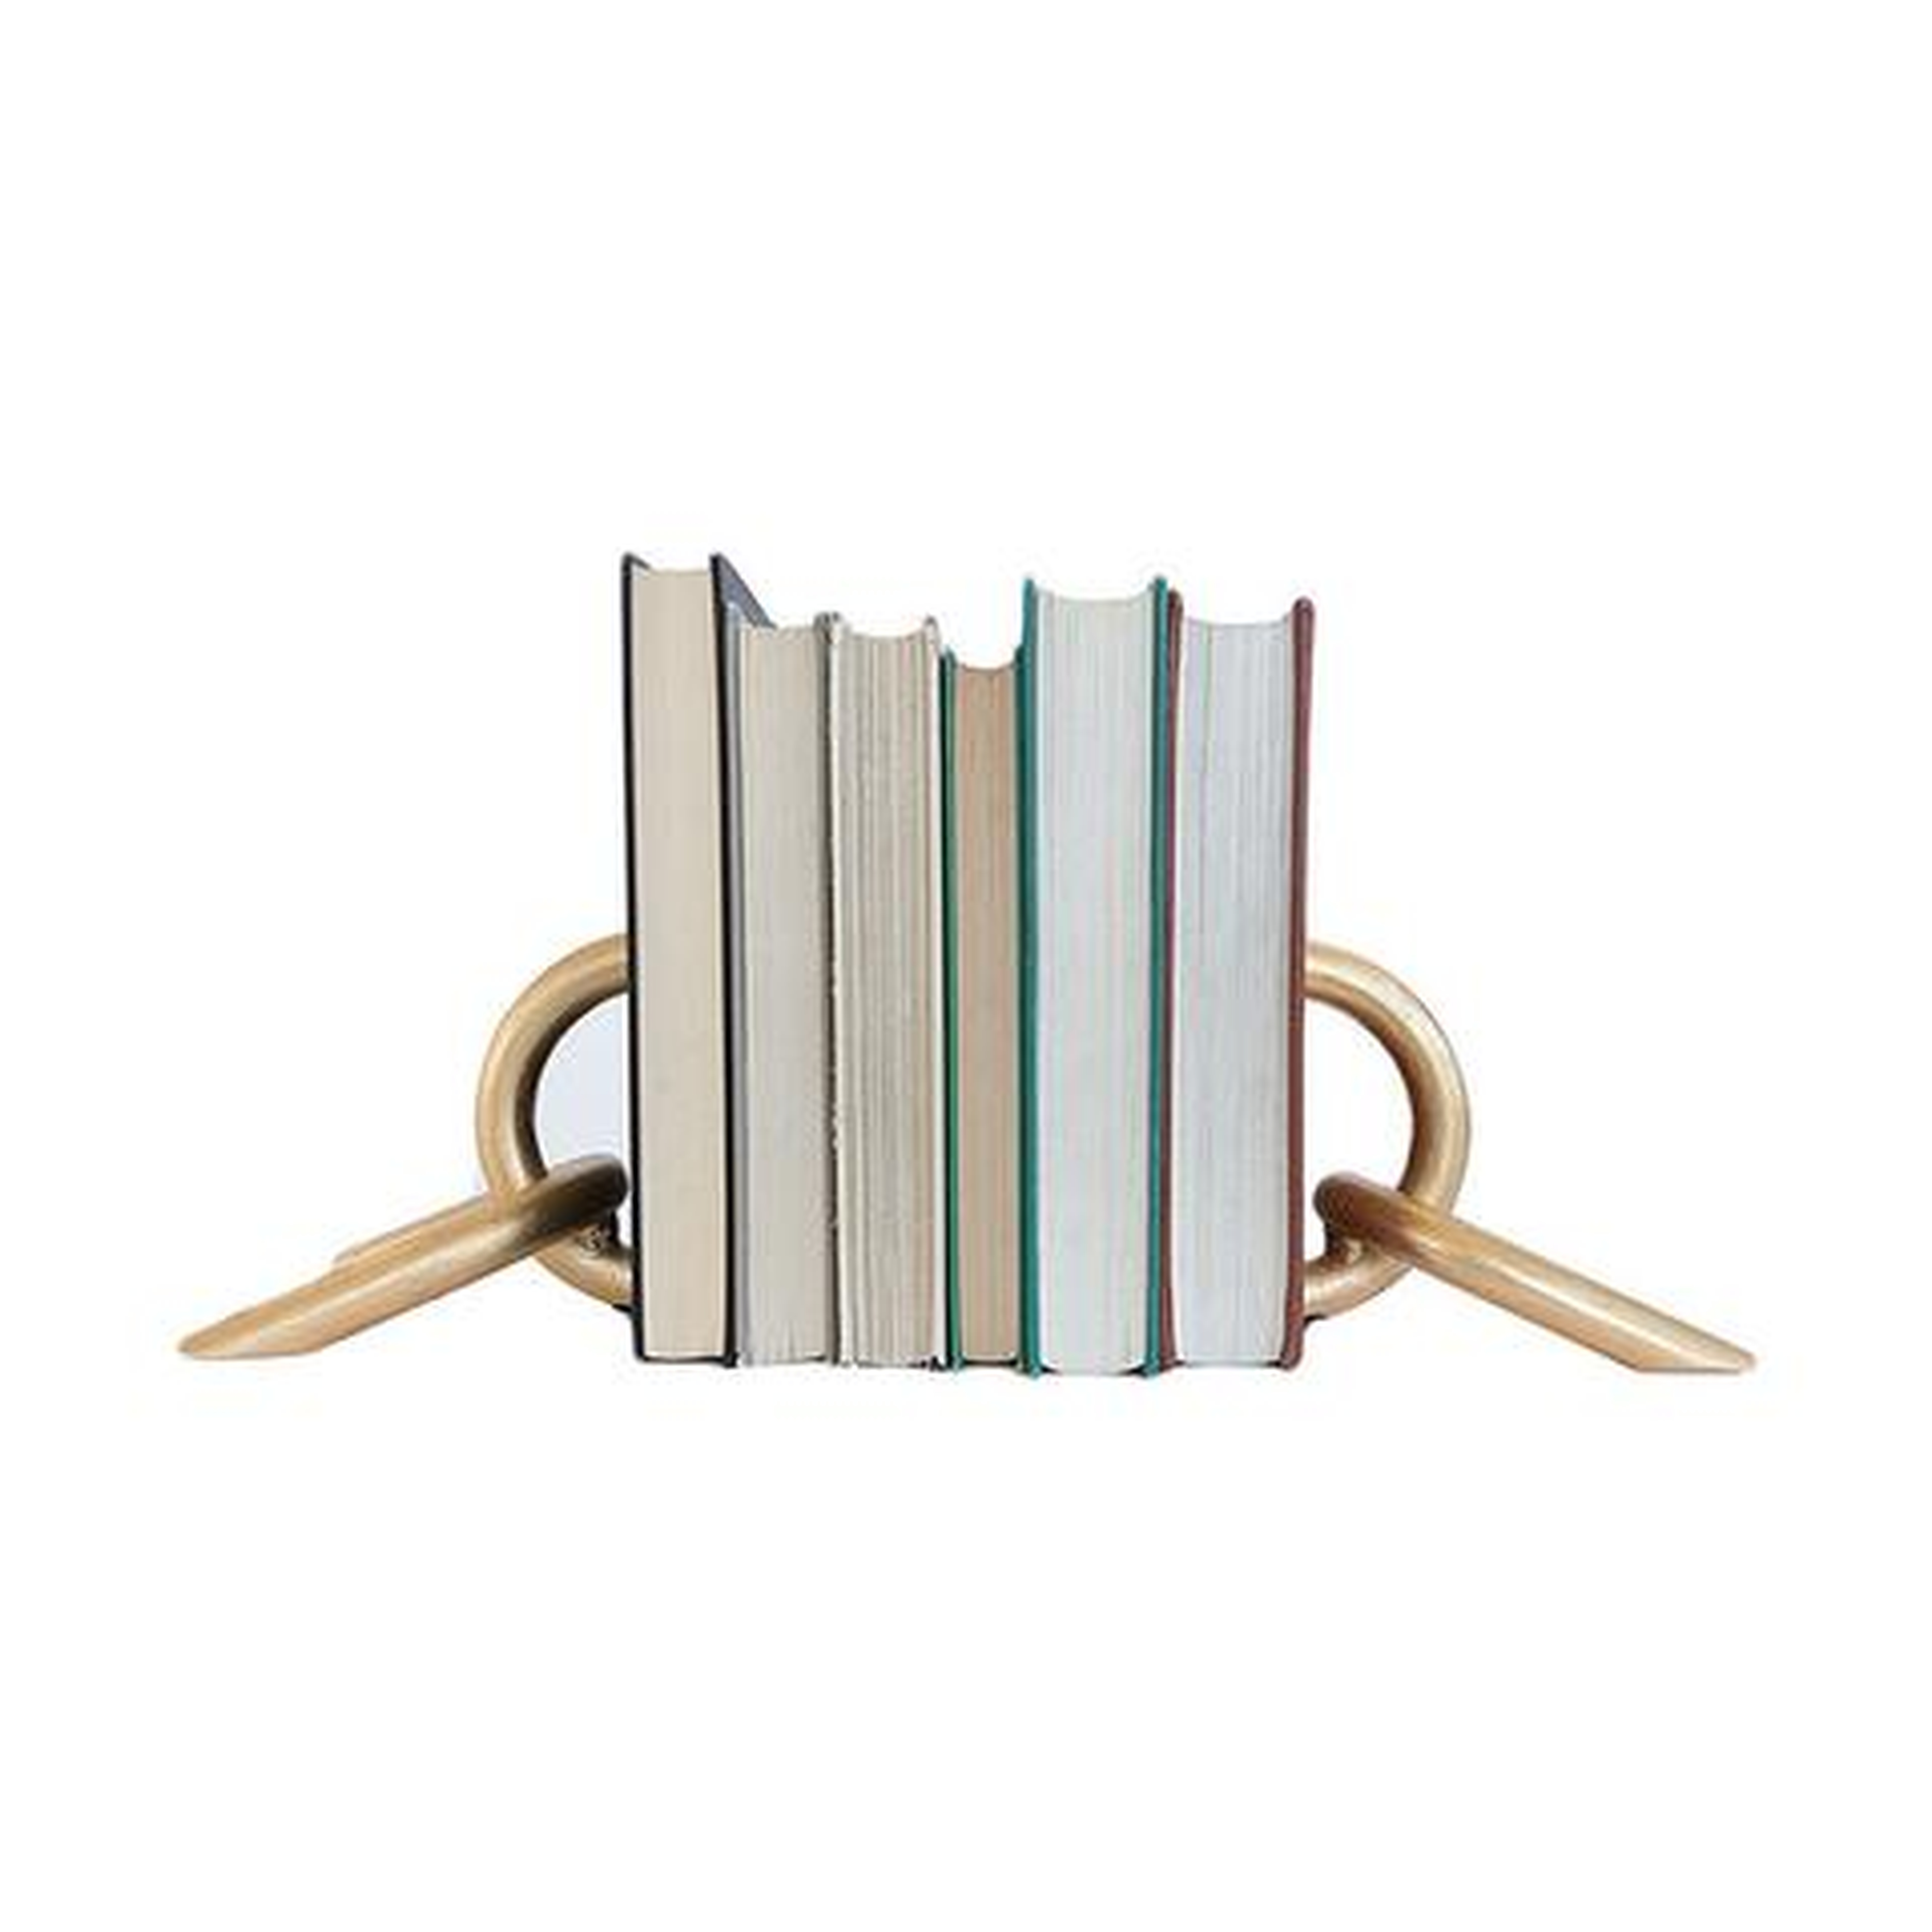 GOLD CHAIN BOOKENDS - McGee & Co.